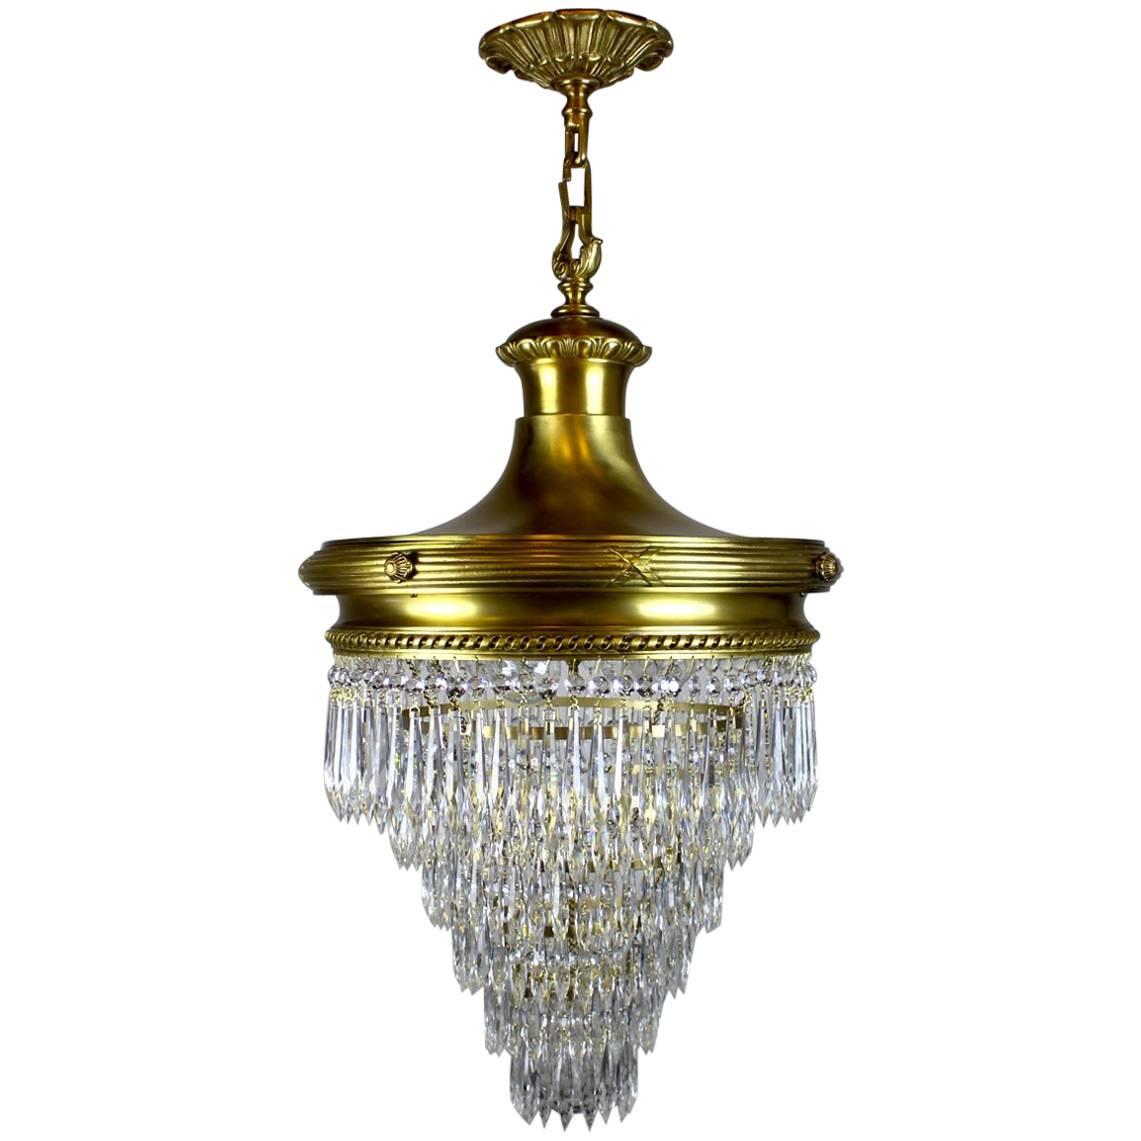 'Wedding Cake' Chandelier by R. Williamson For Sale